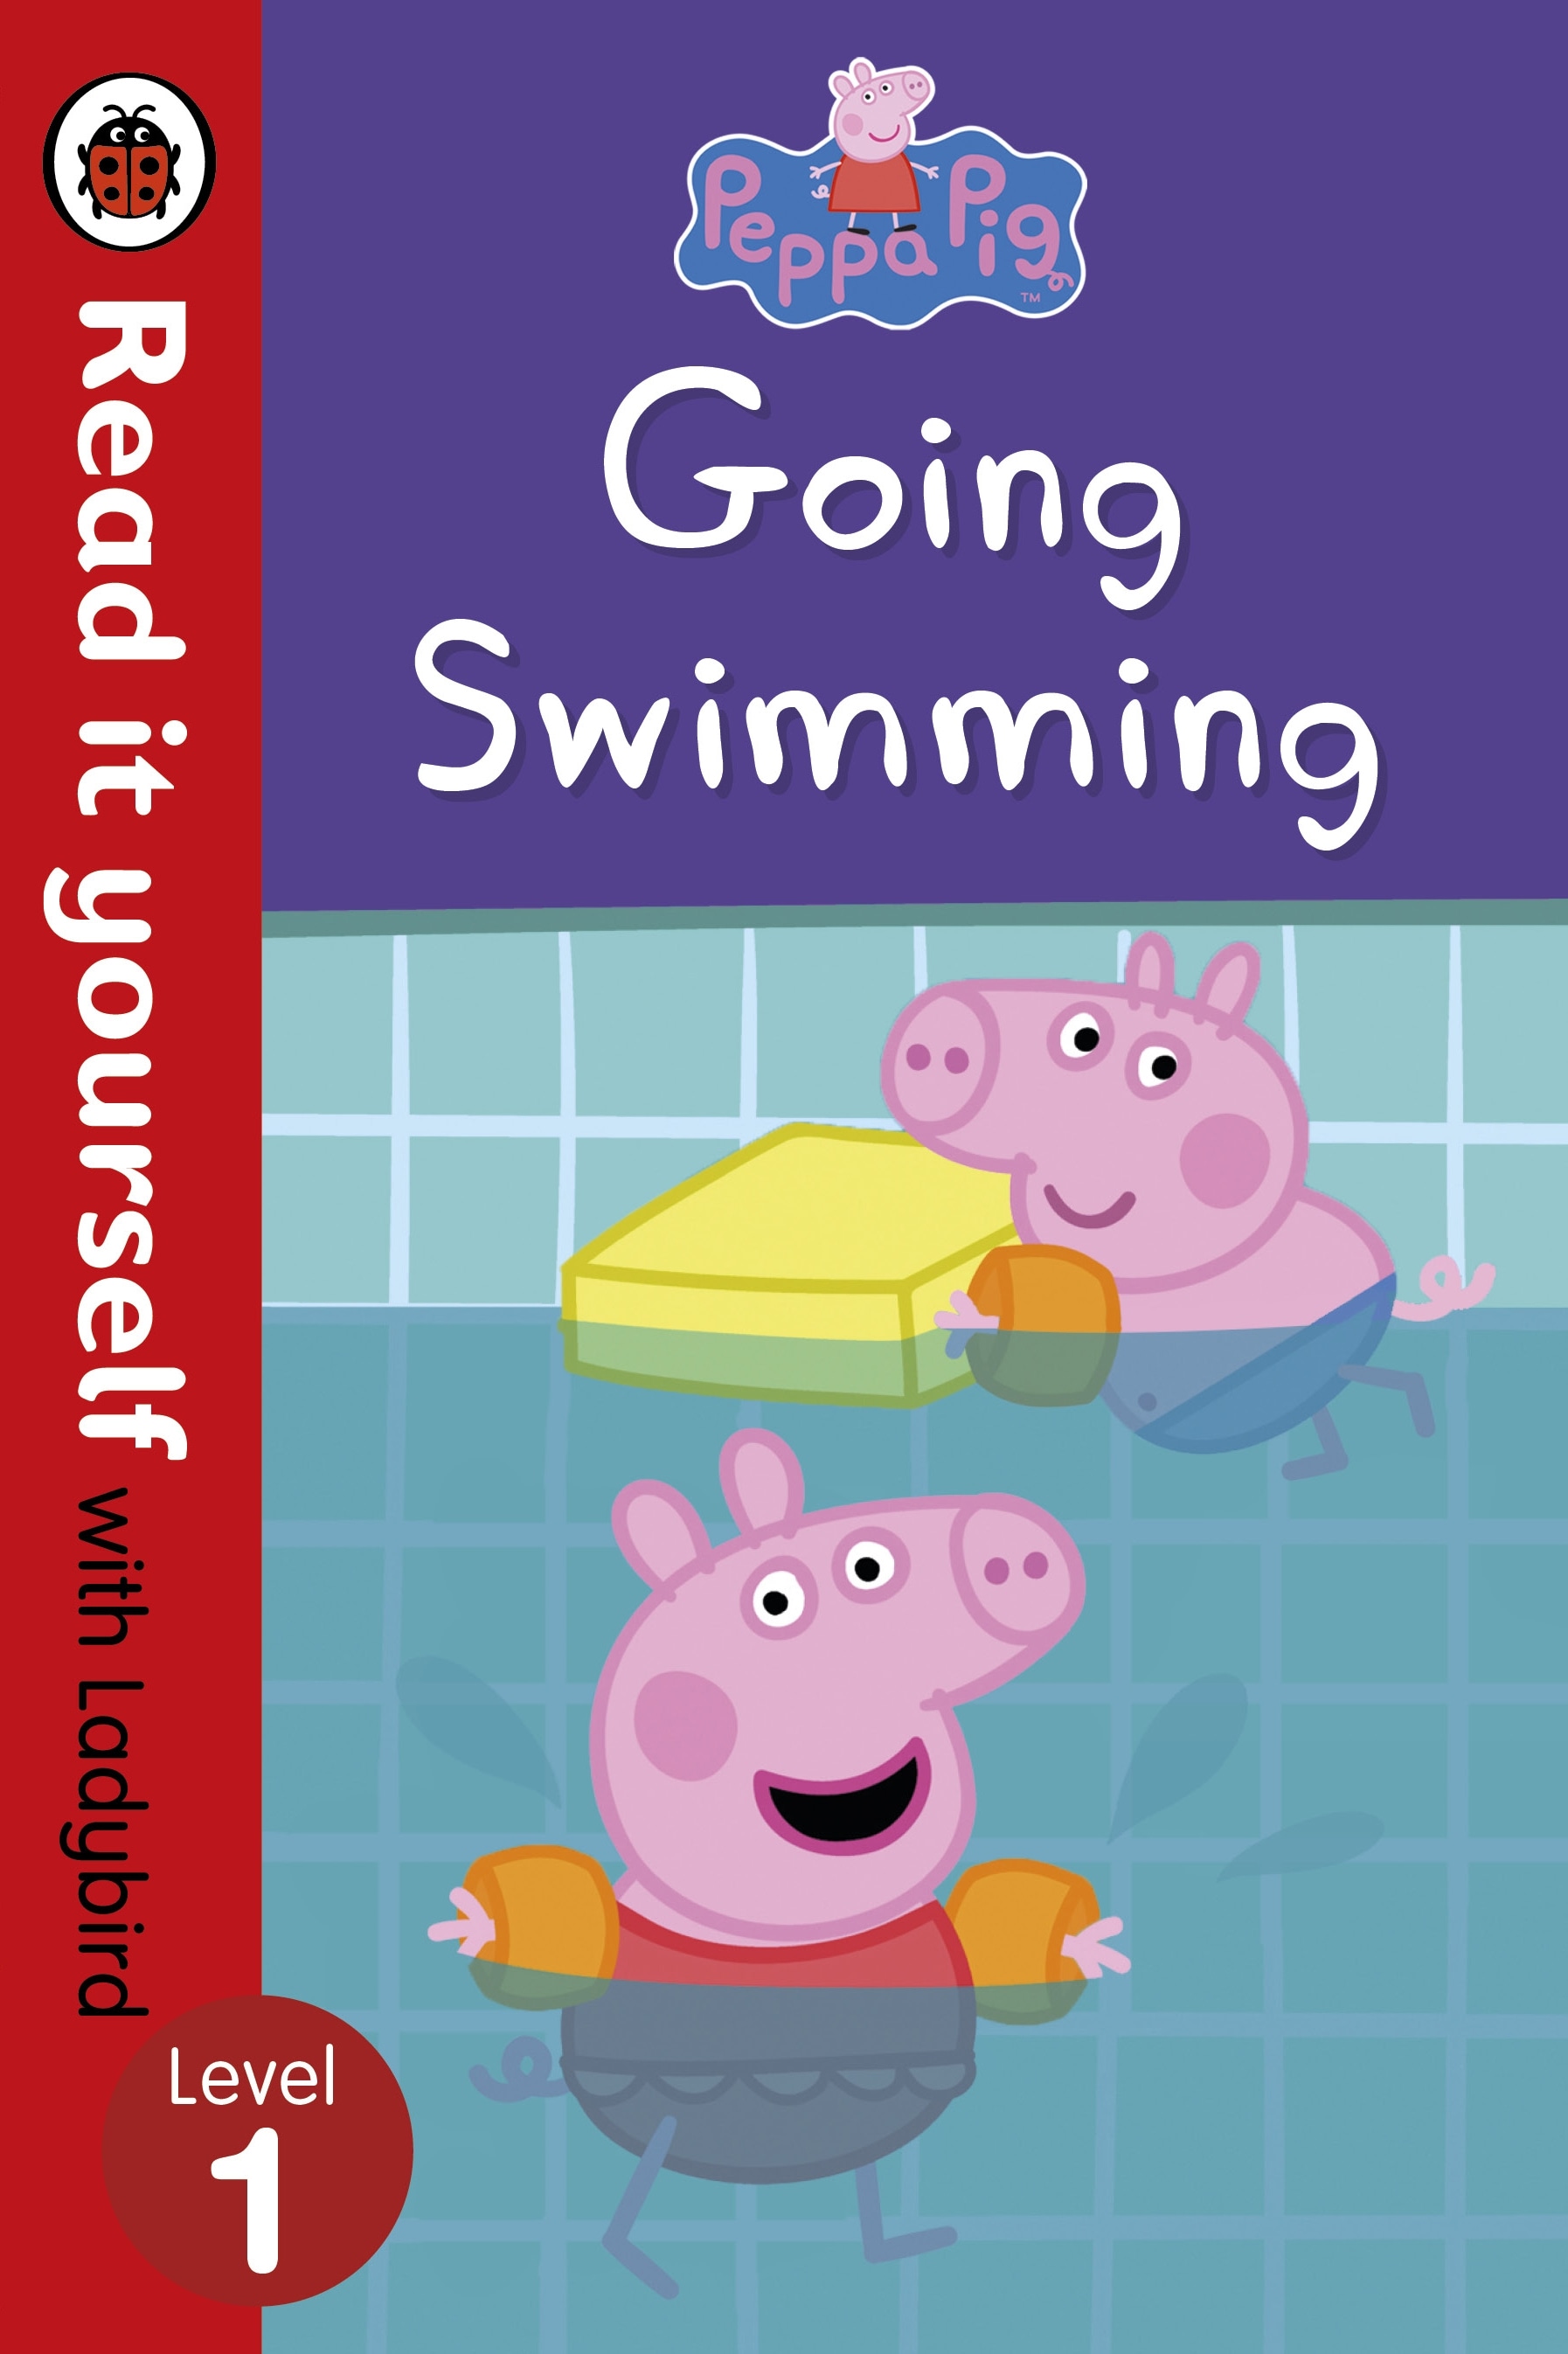 Book “Peppa Pig: Going Swimming – Read It Yourself with Ladybird Level 1” by Ladybird, Peppa Pig — July 7, 2016